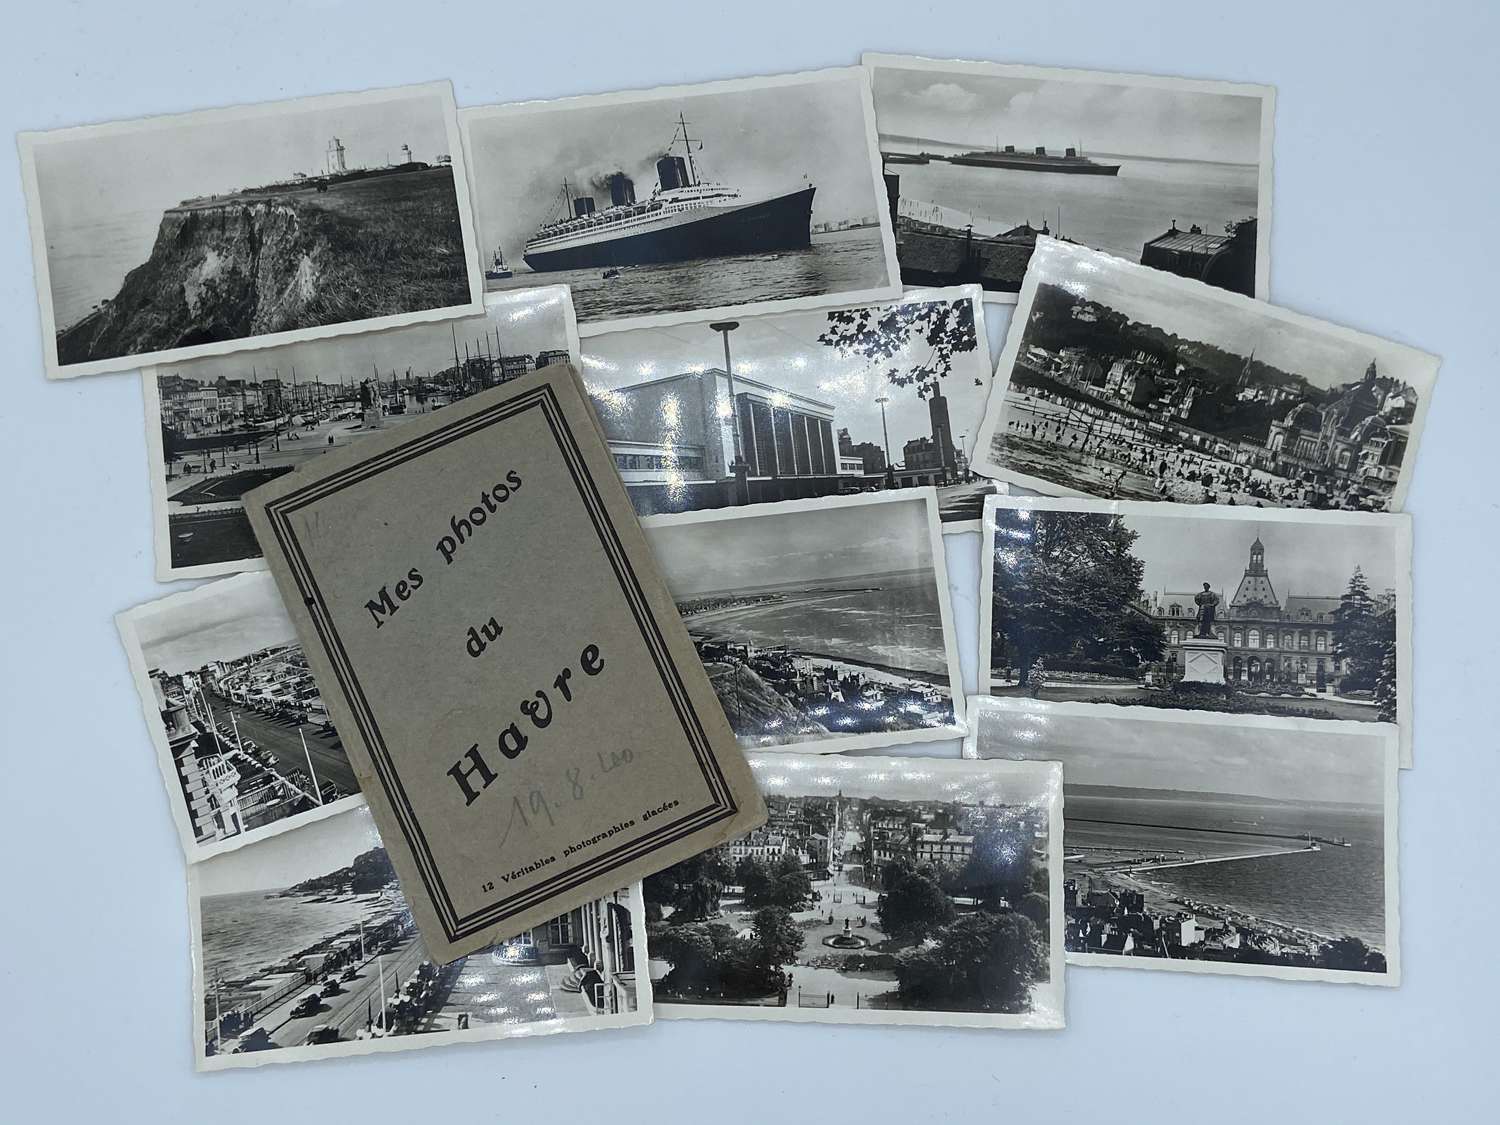 SS Normandie Tourist Photographs Dated 19.08.1940